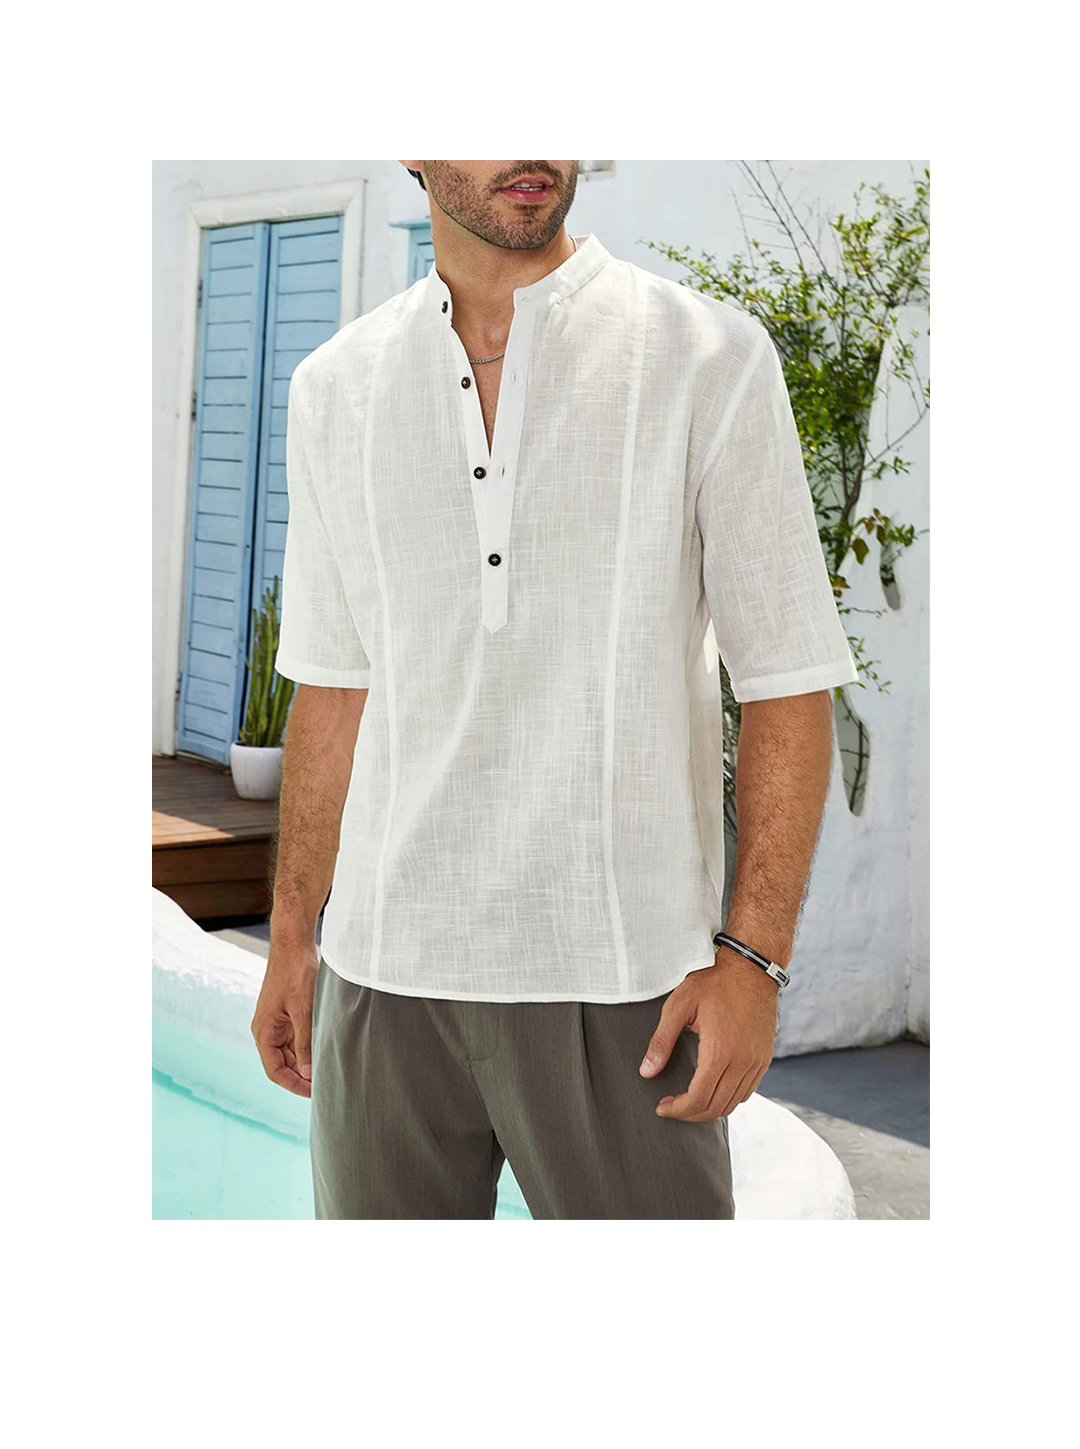 Men's Buford Comfortable Casual Mid-sleeve Shirt-poisonstreetwear.com